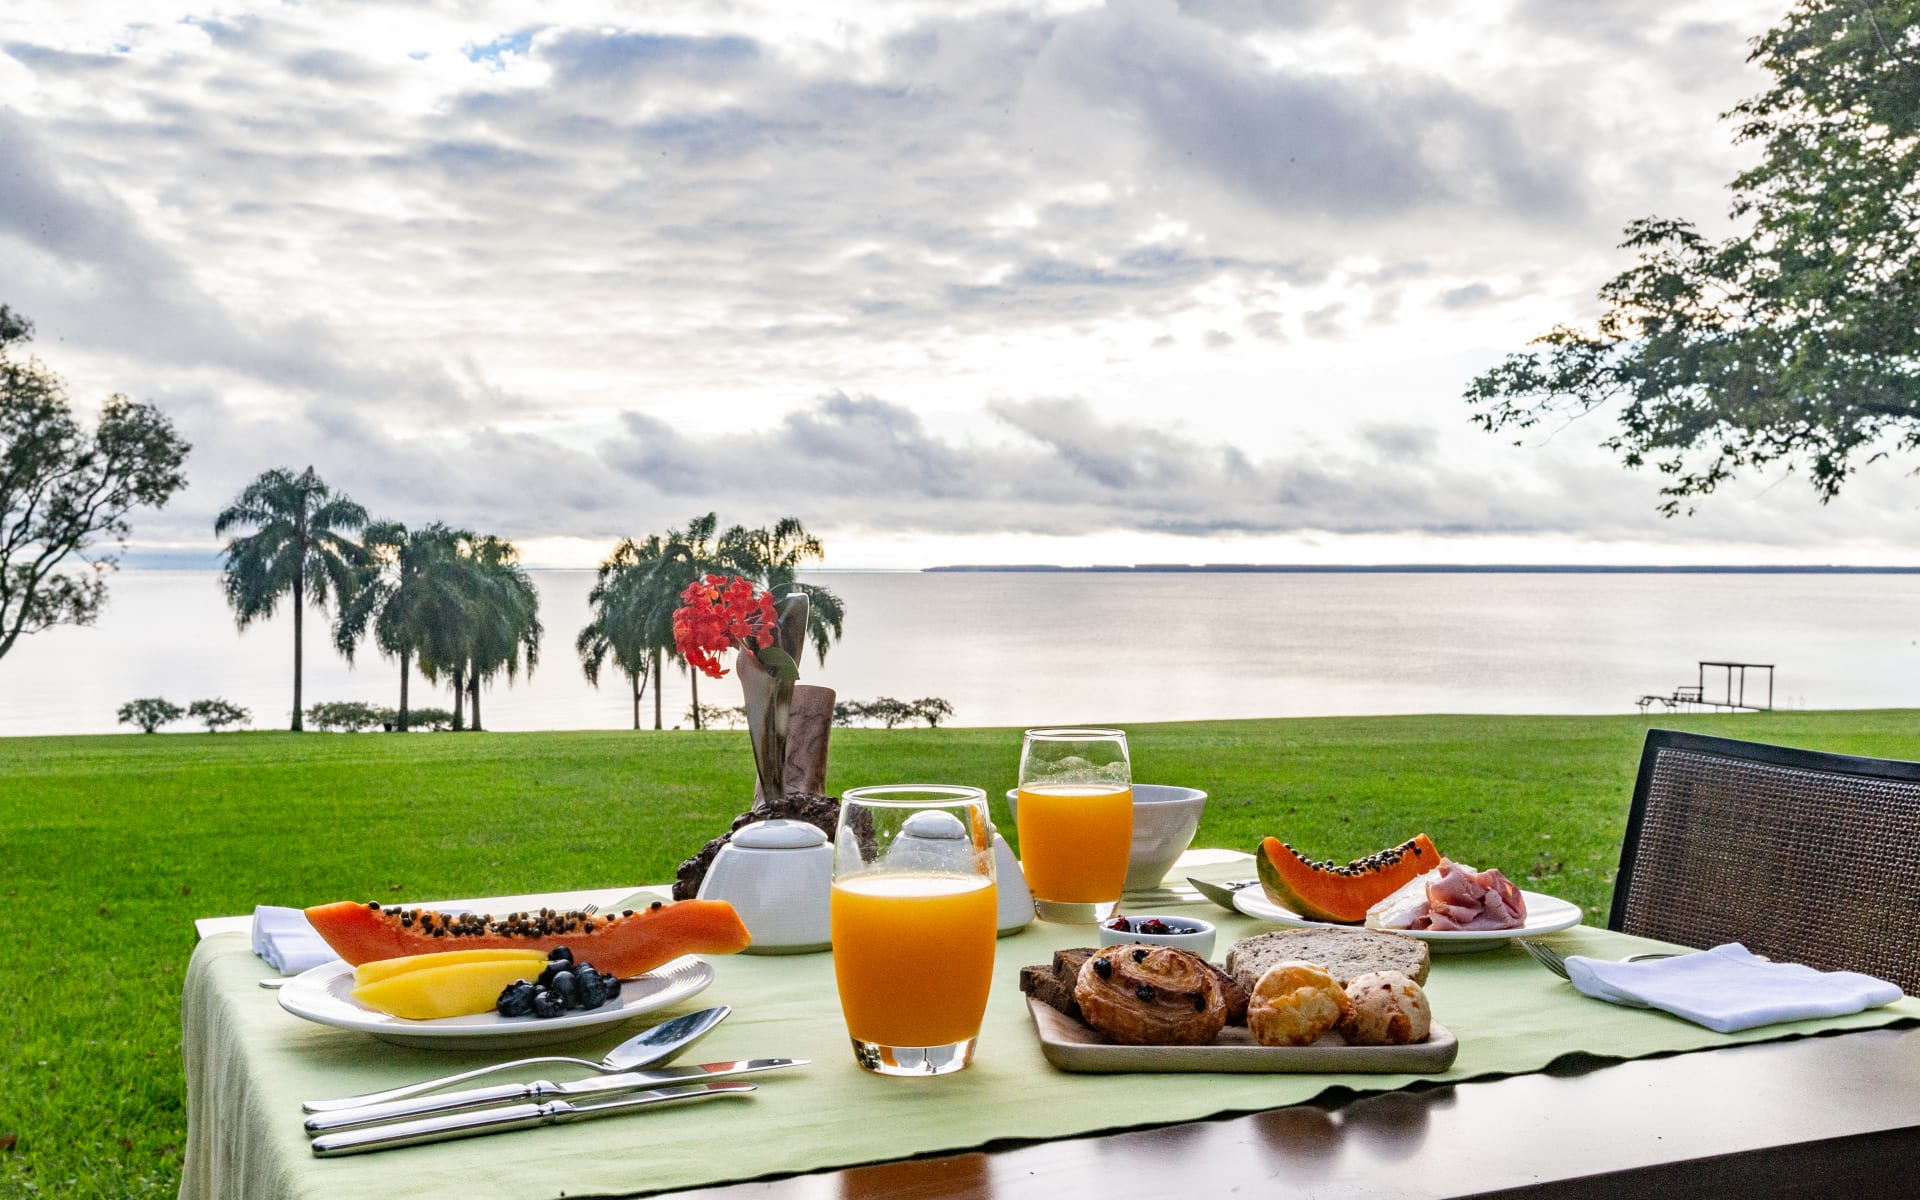 A two-person table is set up on the lawn, overlooking the water and palm trees, with breakfast, pastries and orange juice.